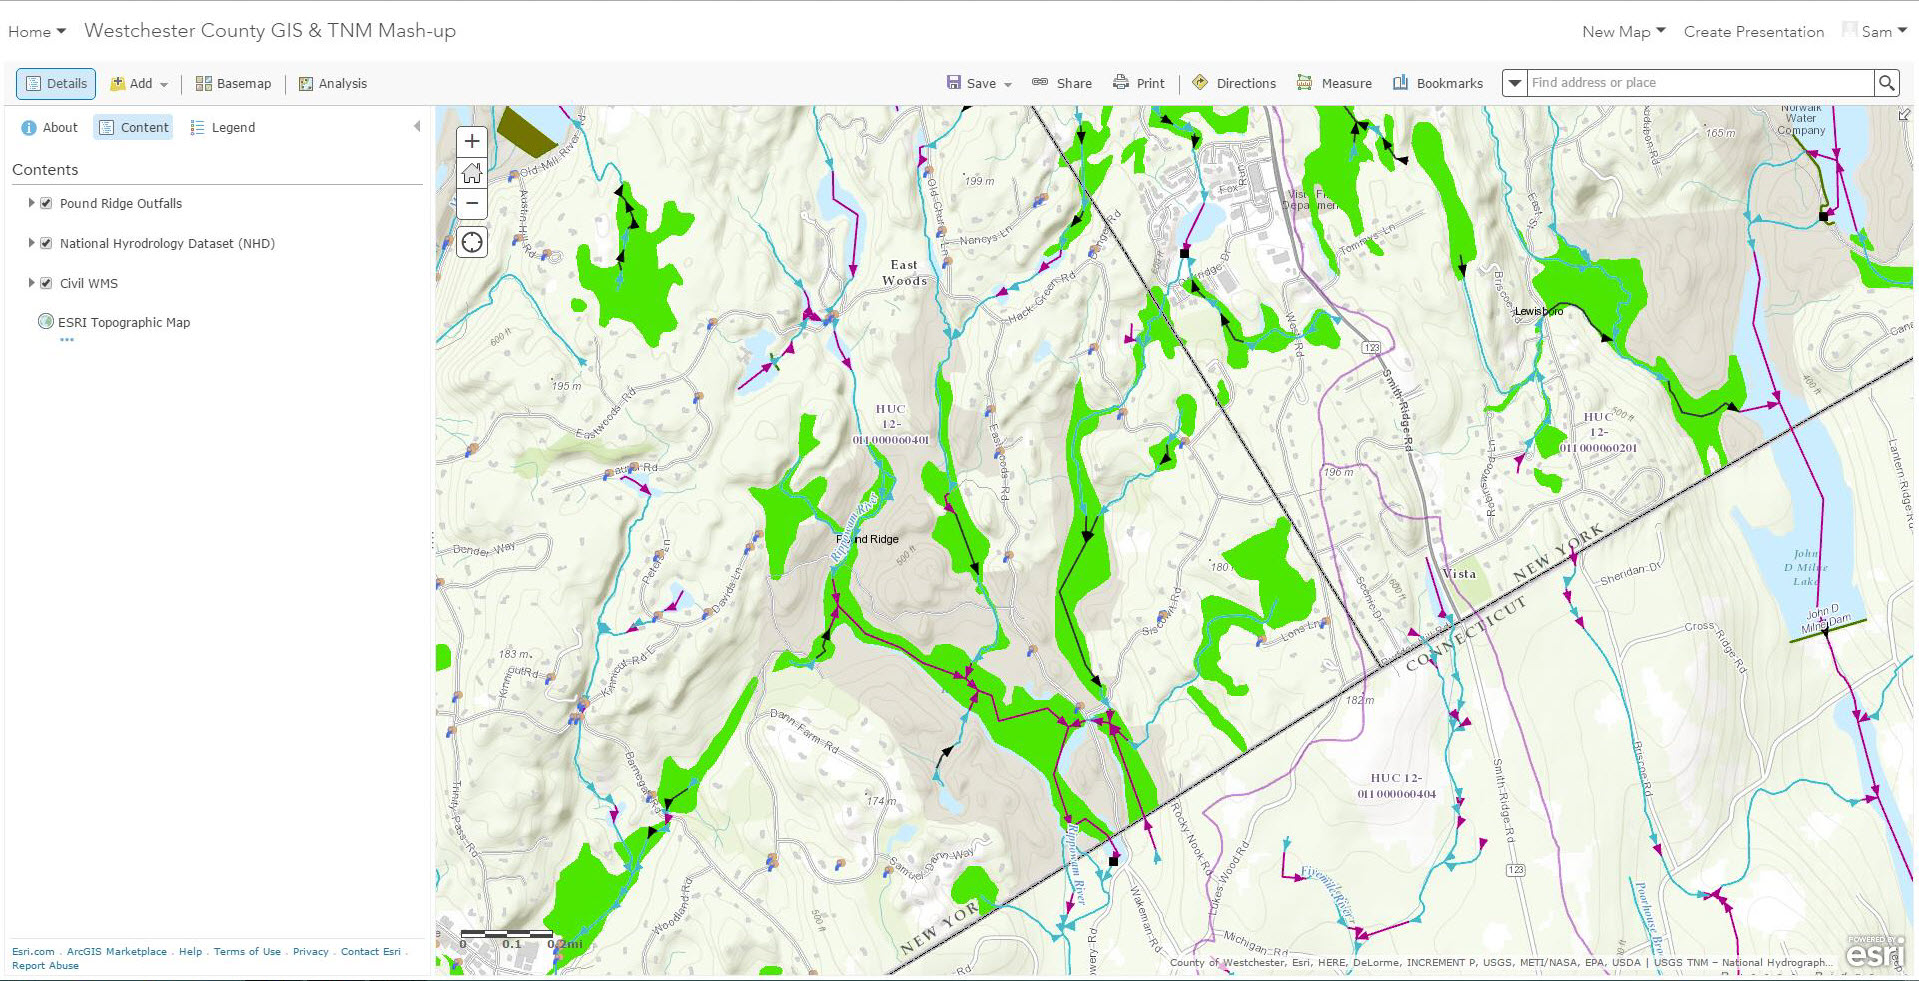 Using the ArcGIS Online Viewer, users can “mash-up” map services from different sources. This example includes a WMS service being published by Westchester County GIS (highlighting wetlands in green), storm water outfalls in the Town of Pound Ridge (adjacent the State of Connecticut border), and hydrology flow data from an NHD map service published through the National Map.